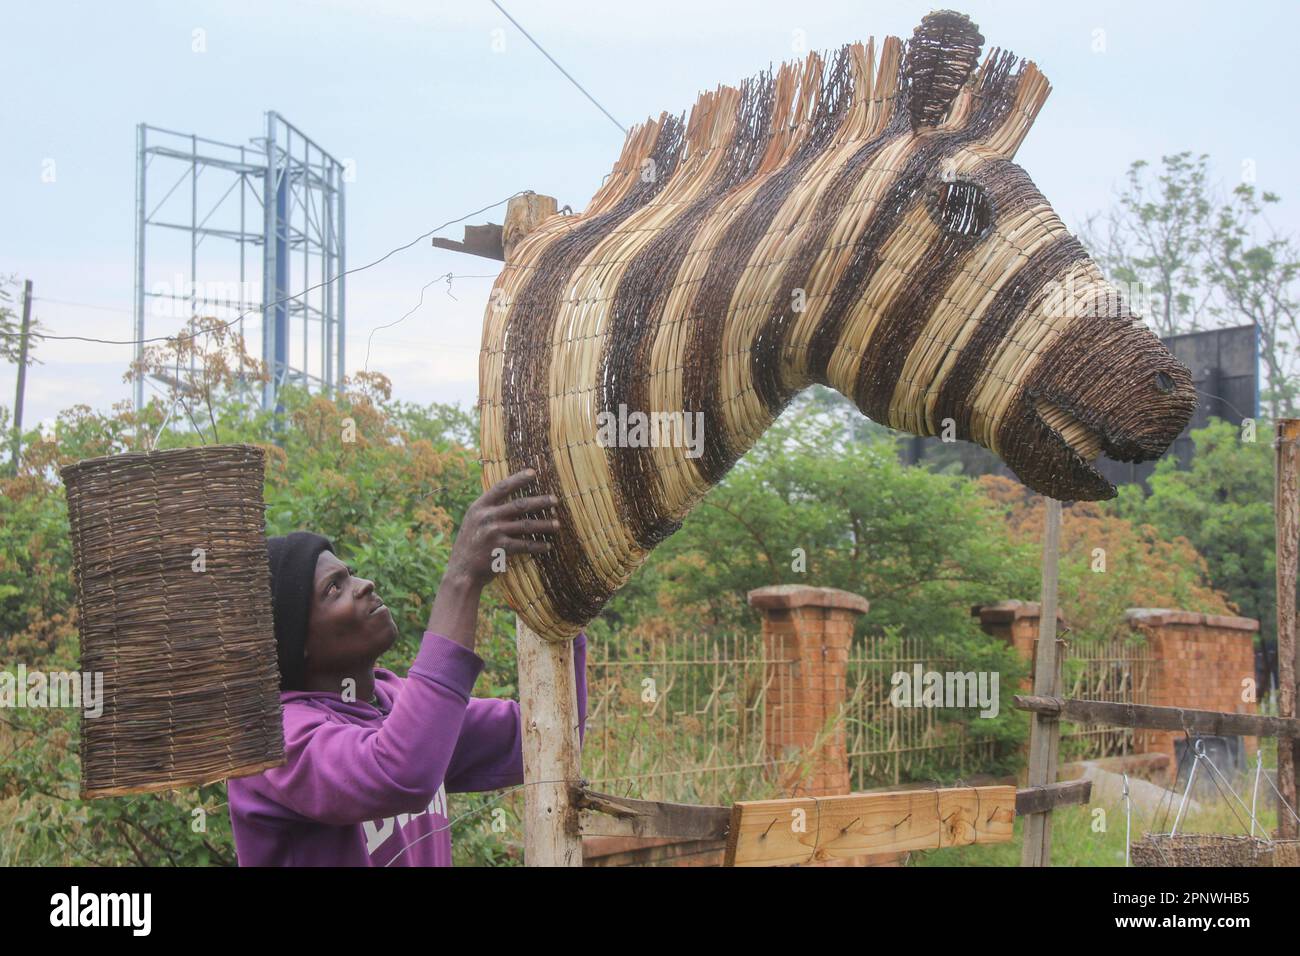 Berril Mwango, an artist, displays a zebra artwork along Thabo Mbeki Road in Lusaka, Zambia on November 20, 2021. “We had literally closed down on business during the peak of the coronavirus, but I used that time to think of new artistic work, and it is paying off,” Mwango says. “Now, we have business, and our artwork is selling like never before.” (Prudence Phiri/Global Press Journal) Stock Photo